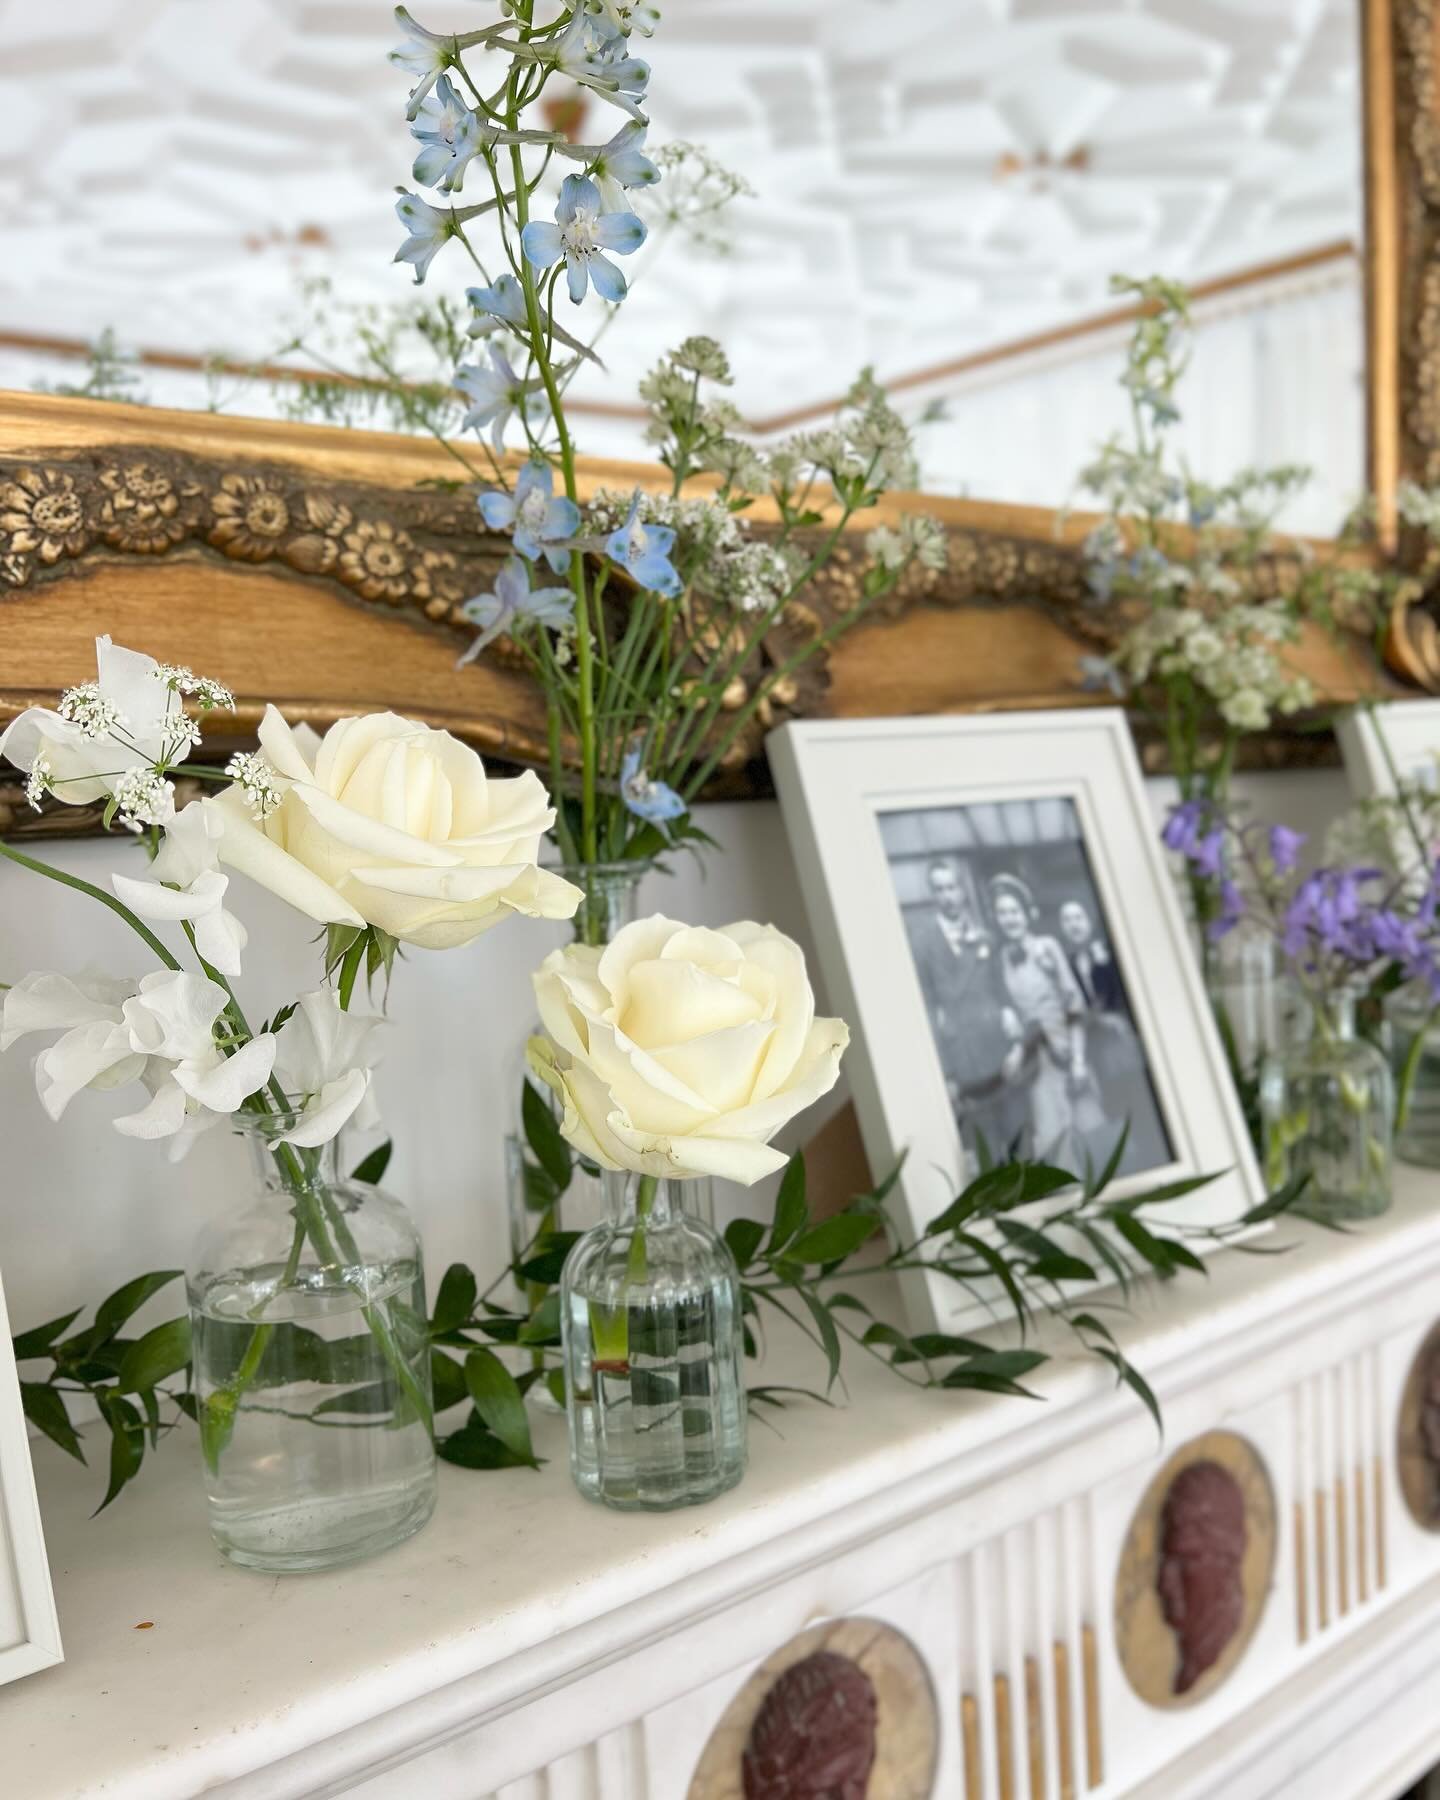 Flowers to surround pictures of loved ones past and presents on your special day 🤍
.
.
.
.
.
.
.
#sussexweddingflowers
#surreyflowers
#surreyflorist
#weddingfloristsurrey
#weddingflowerssurrey
#weddingflowerslondon
#weddingfloristlondon
#londonflori